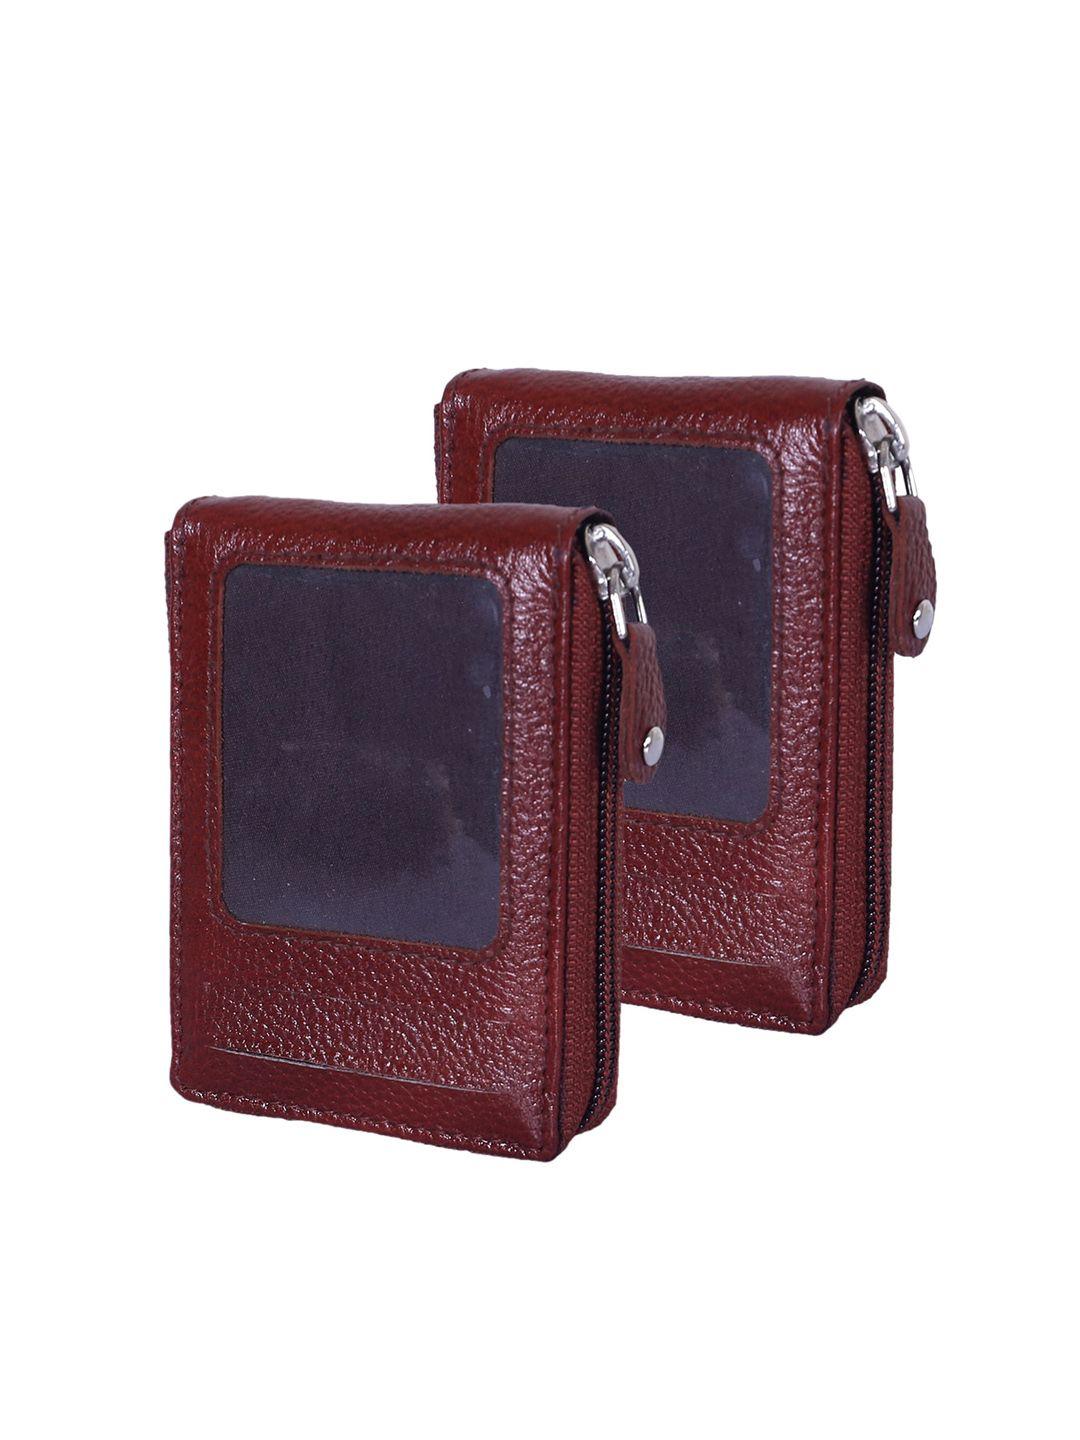 kuber industries unisex set of 2 leather card holders